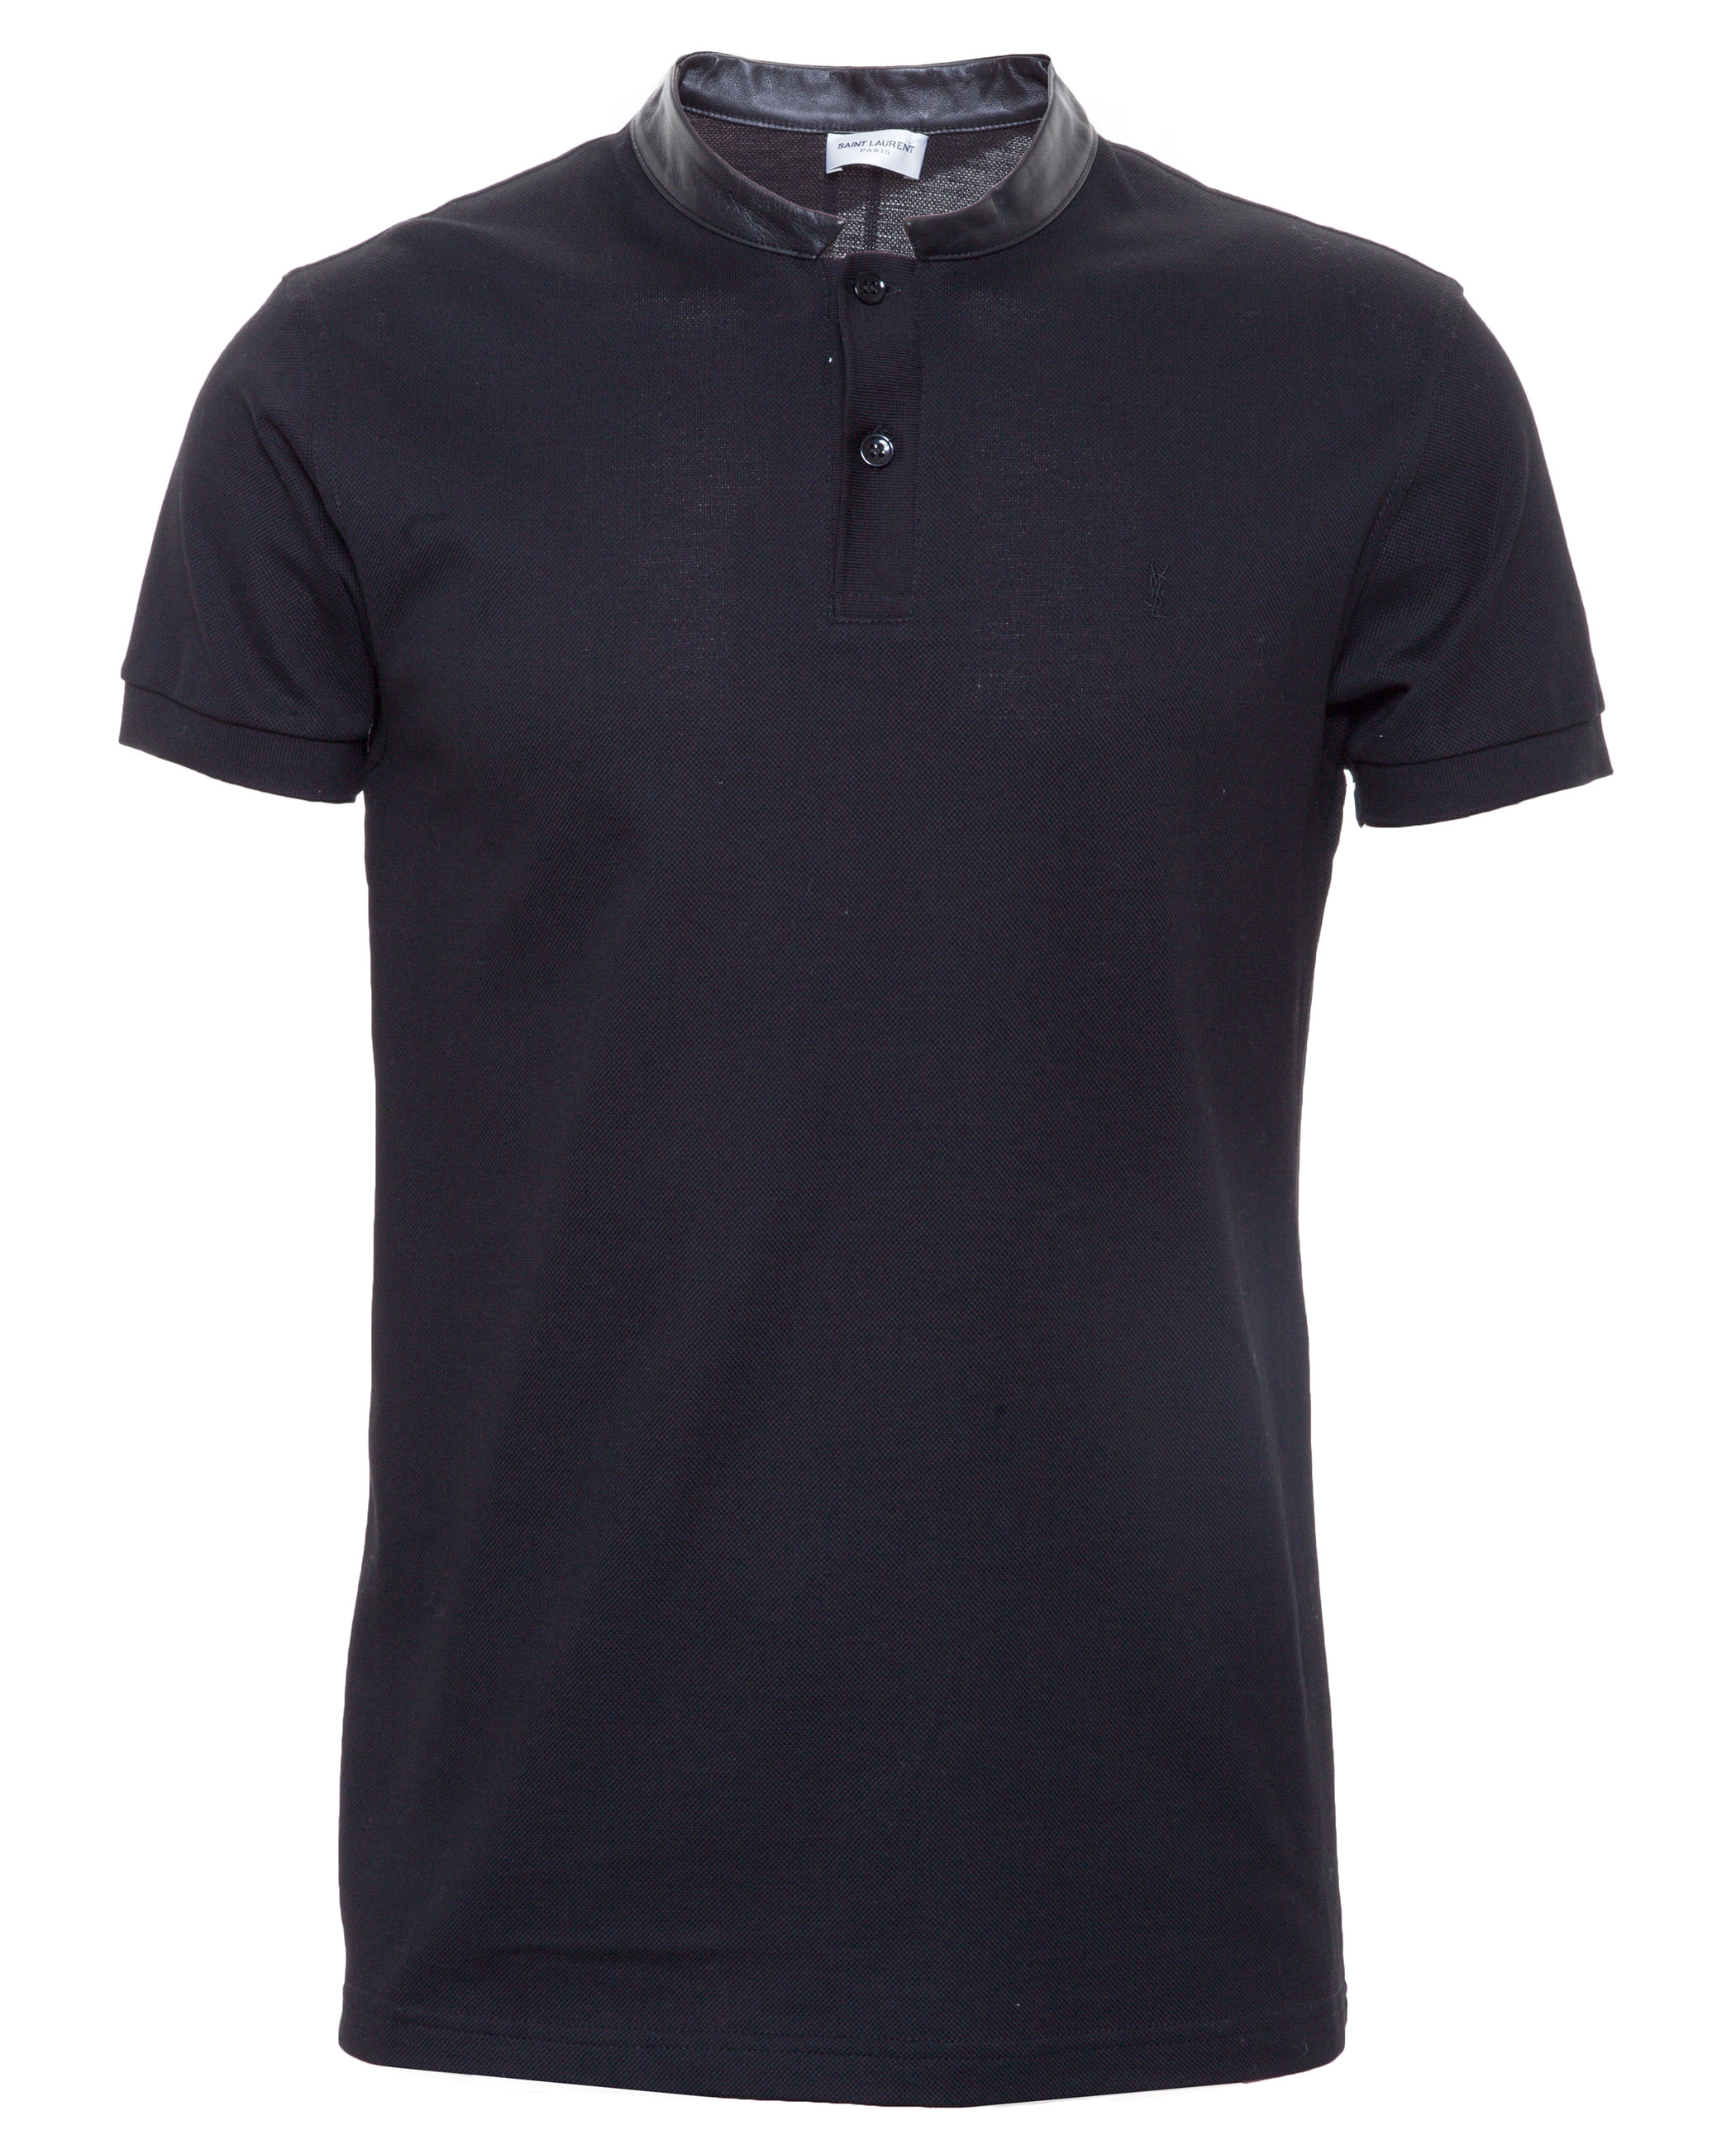 Saint Laurent Polo Shirt With Leather Collar in Black for Men - Lyst